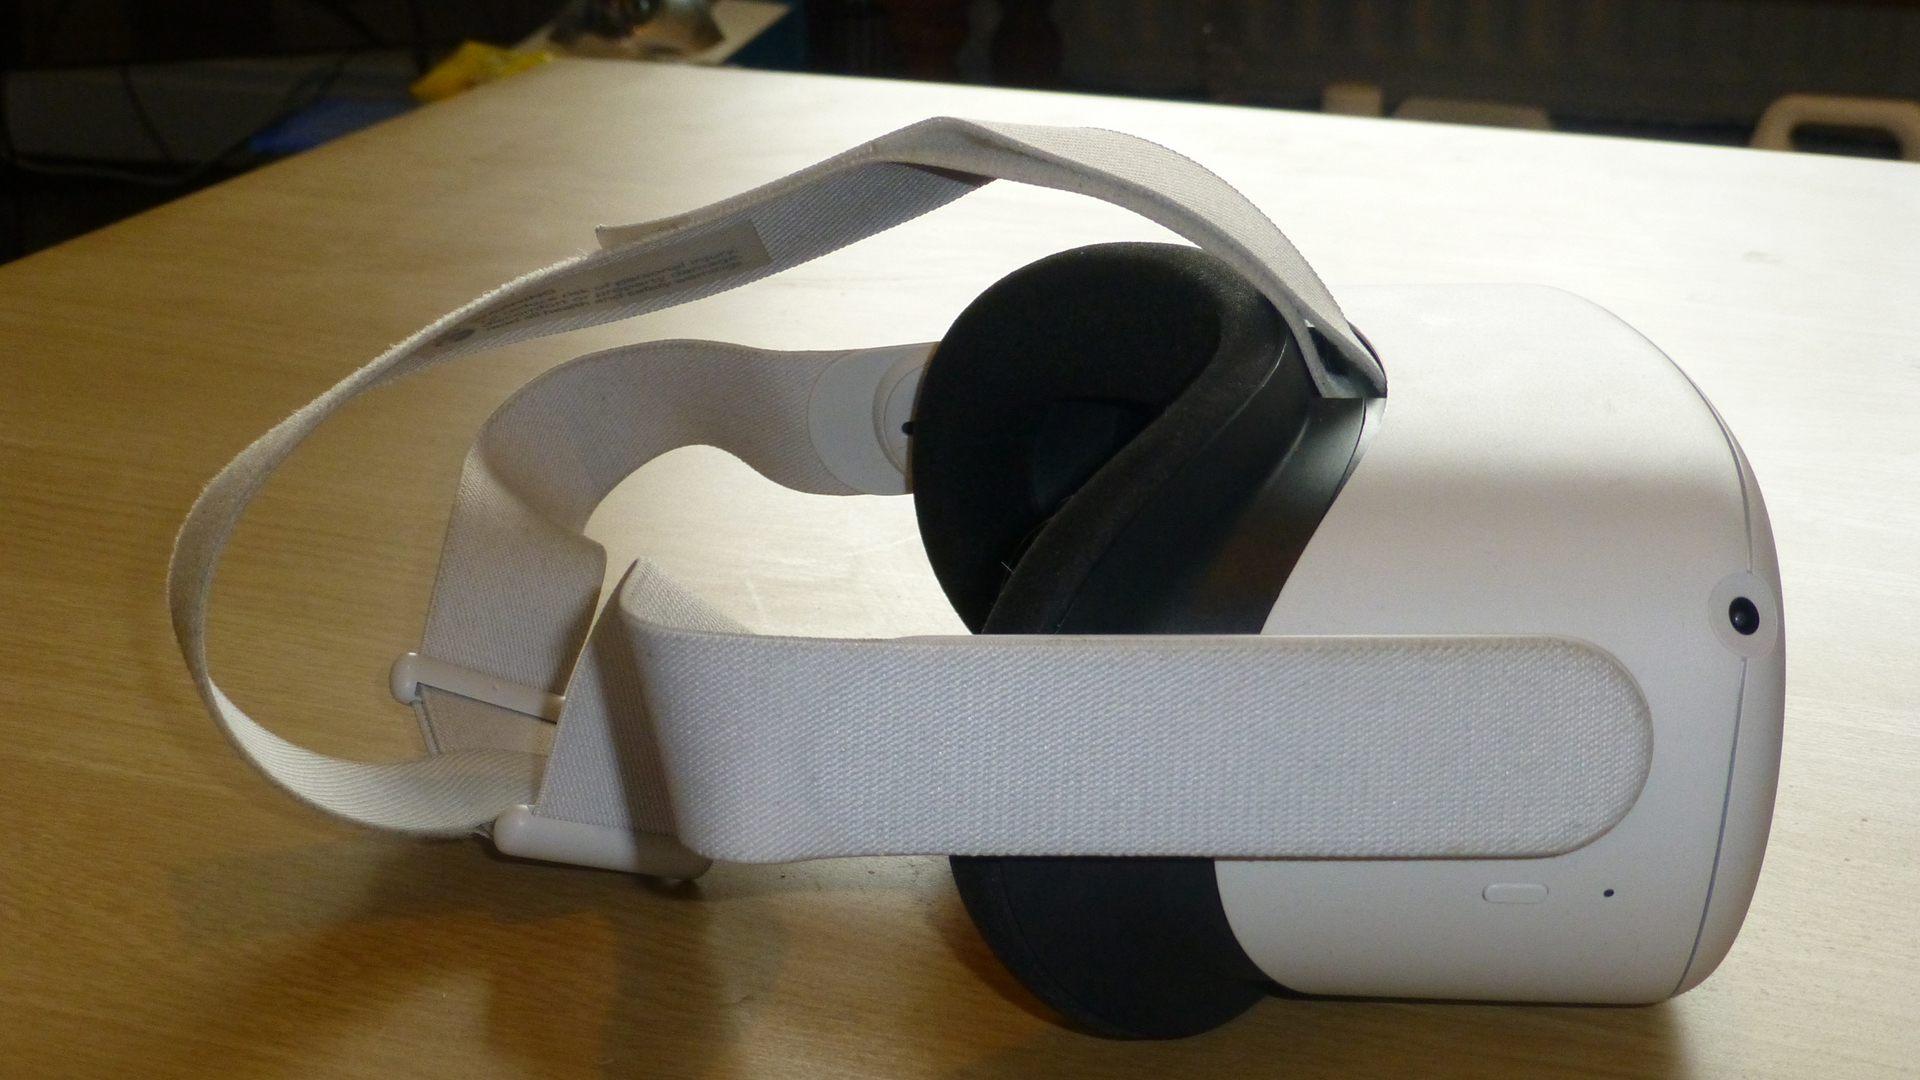 Meta Quest 2 VR headset side angle view.